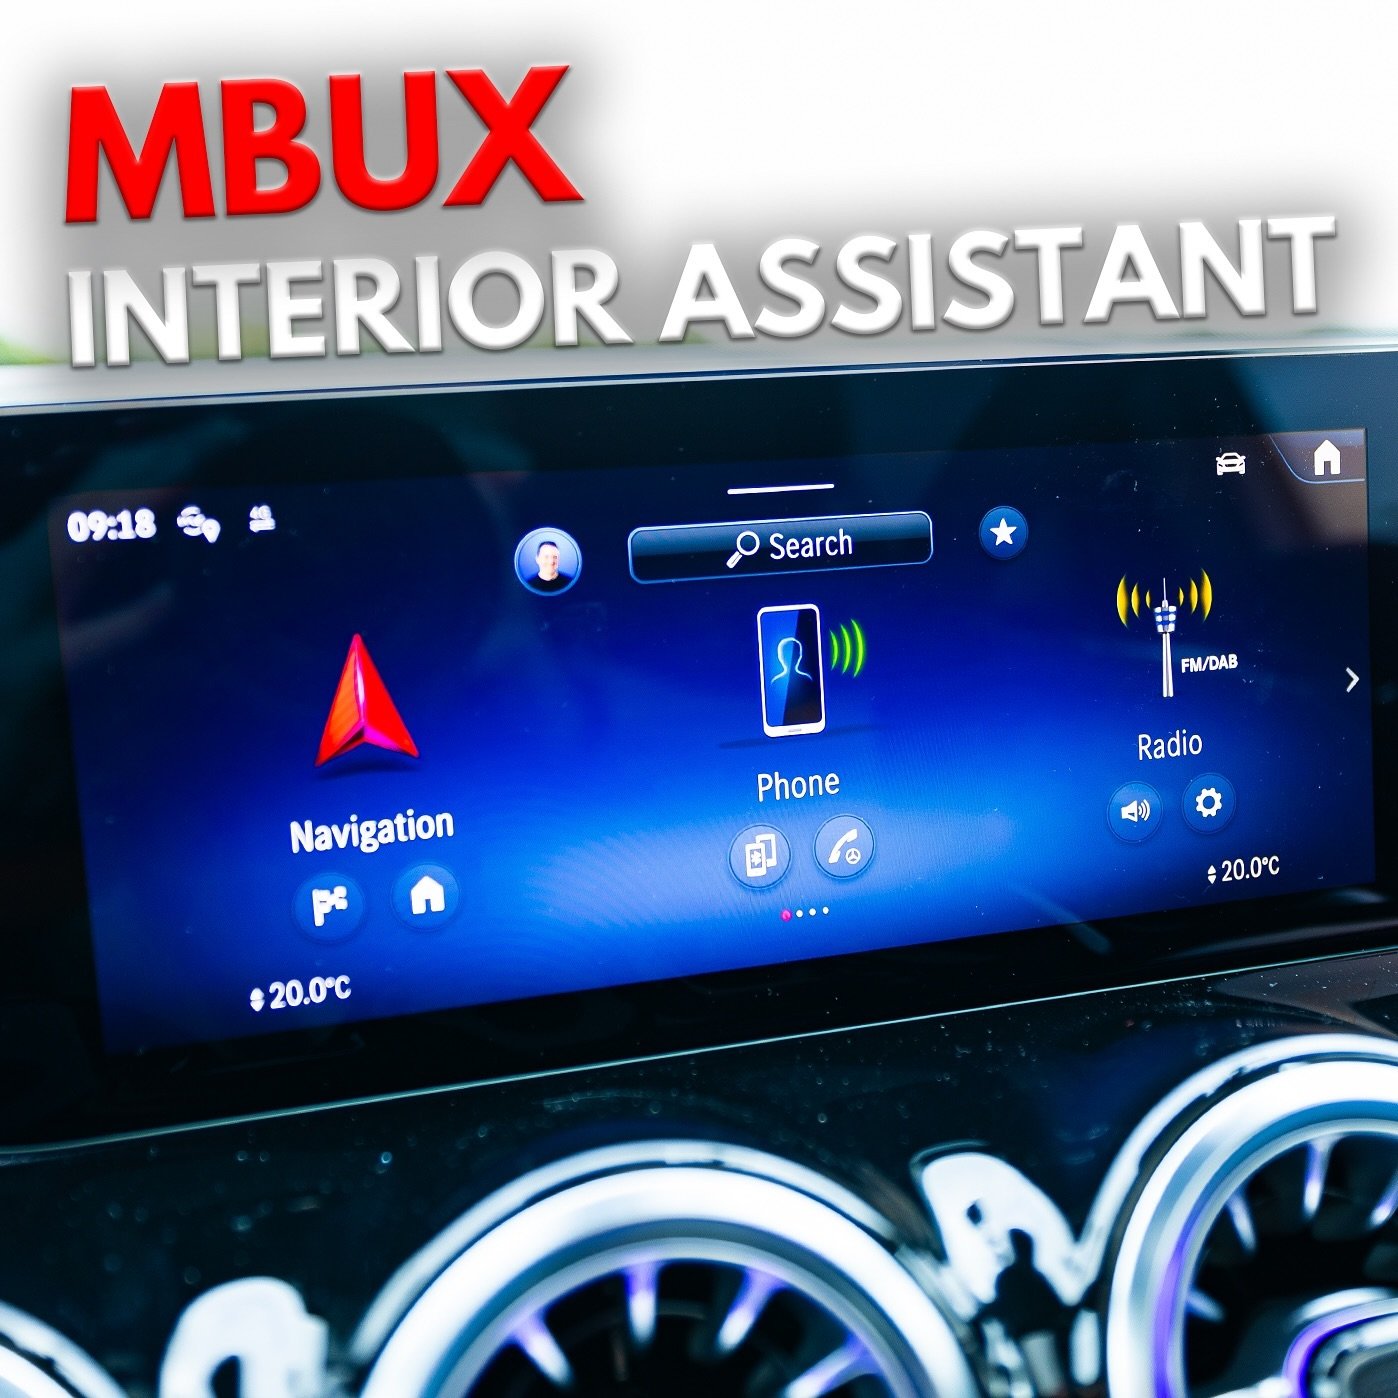 Heard of the MBUX Interior Assistant in a Mercedes? This nifty gadget found on some specifications allows interior lights to come on and even gesture control right from the driver&rsquo;s seat!

Link in the bio above on how it works! ☝️

Loving the c